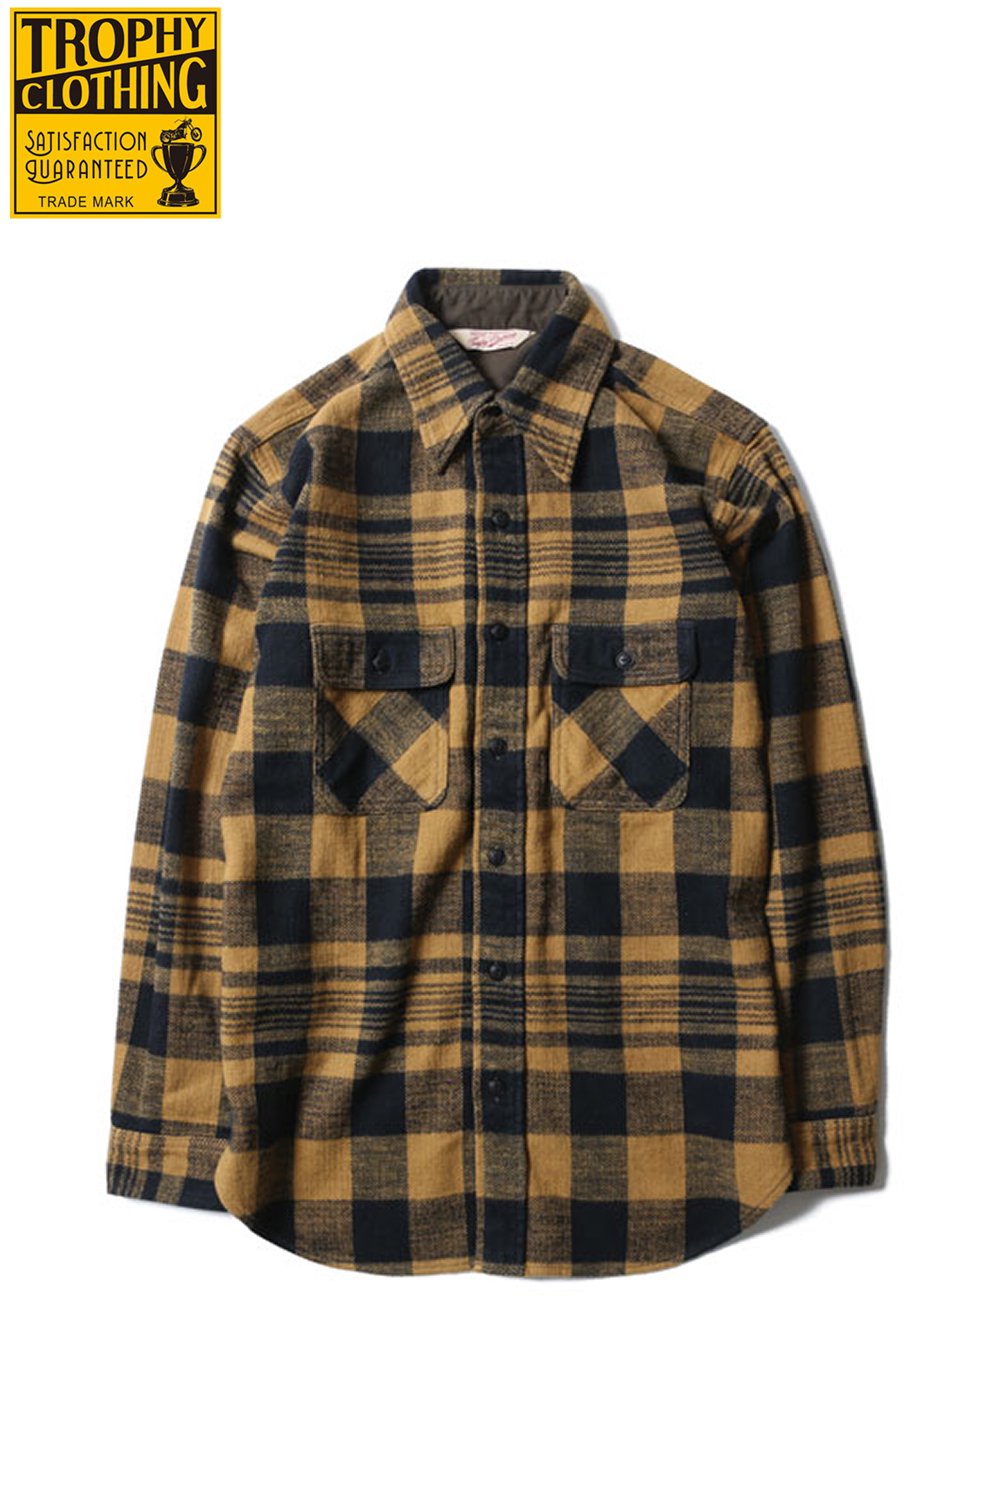 TROPHY CLOTHING(トロフィークロージング) バッファローチェックシャツ Buffalo L/S Shirt TR19AW-403  通販正規取扱 | ハーレムストア公式通販サイト